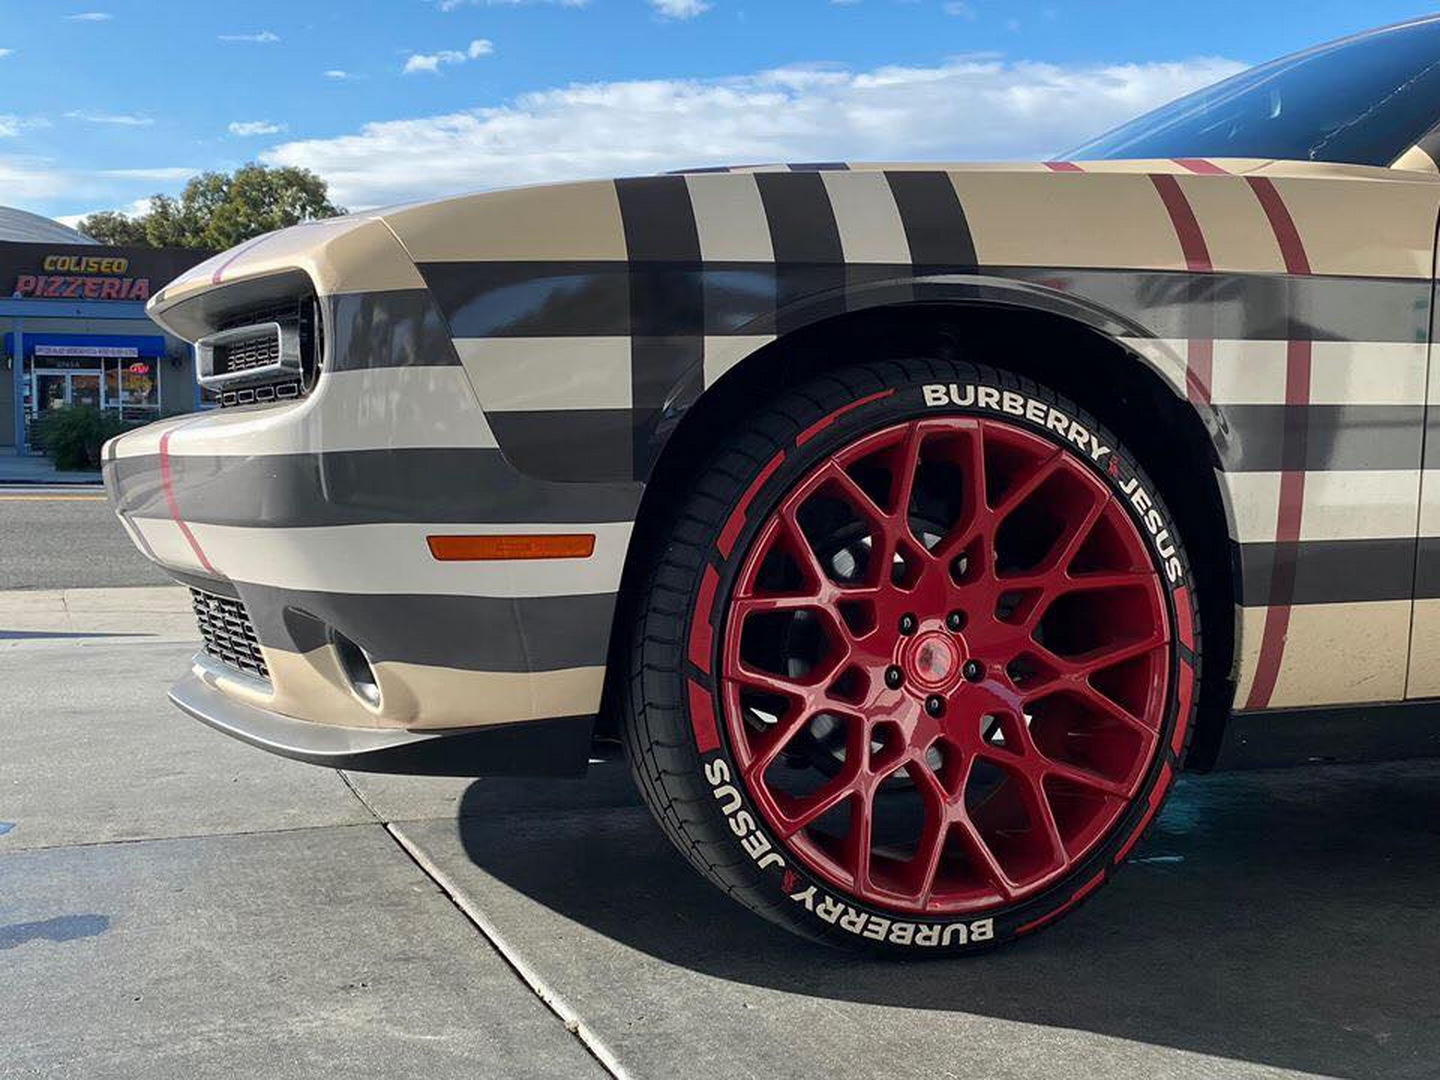 Dodge Challenger And Burberry Plaid Don't Really Go Well Together, Do They?  | Carscoops